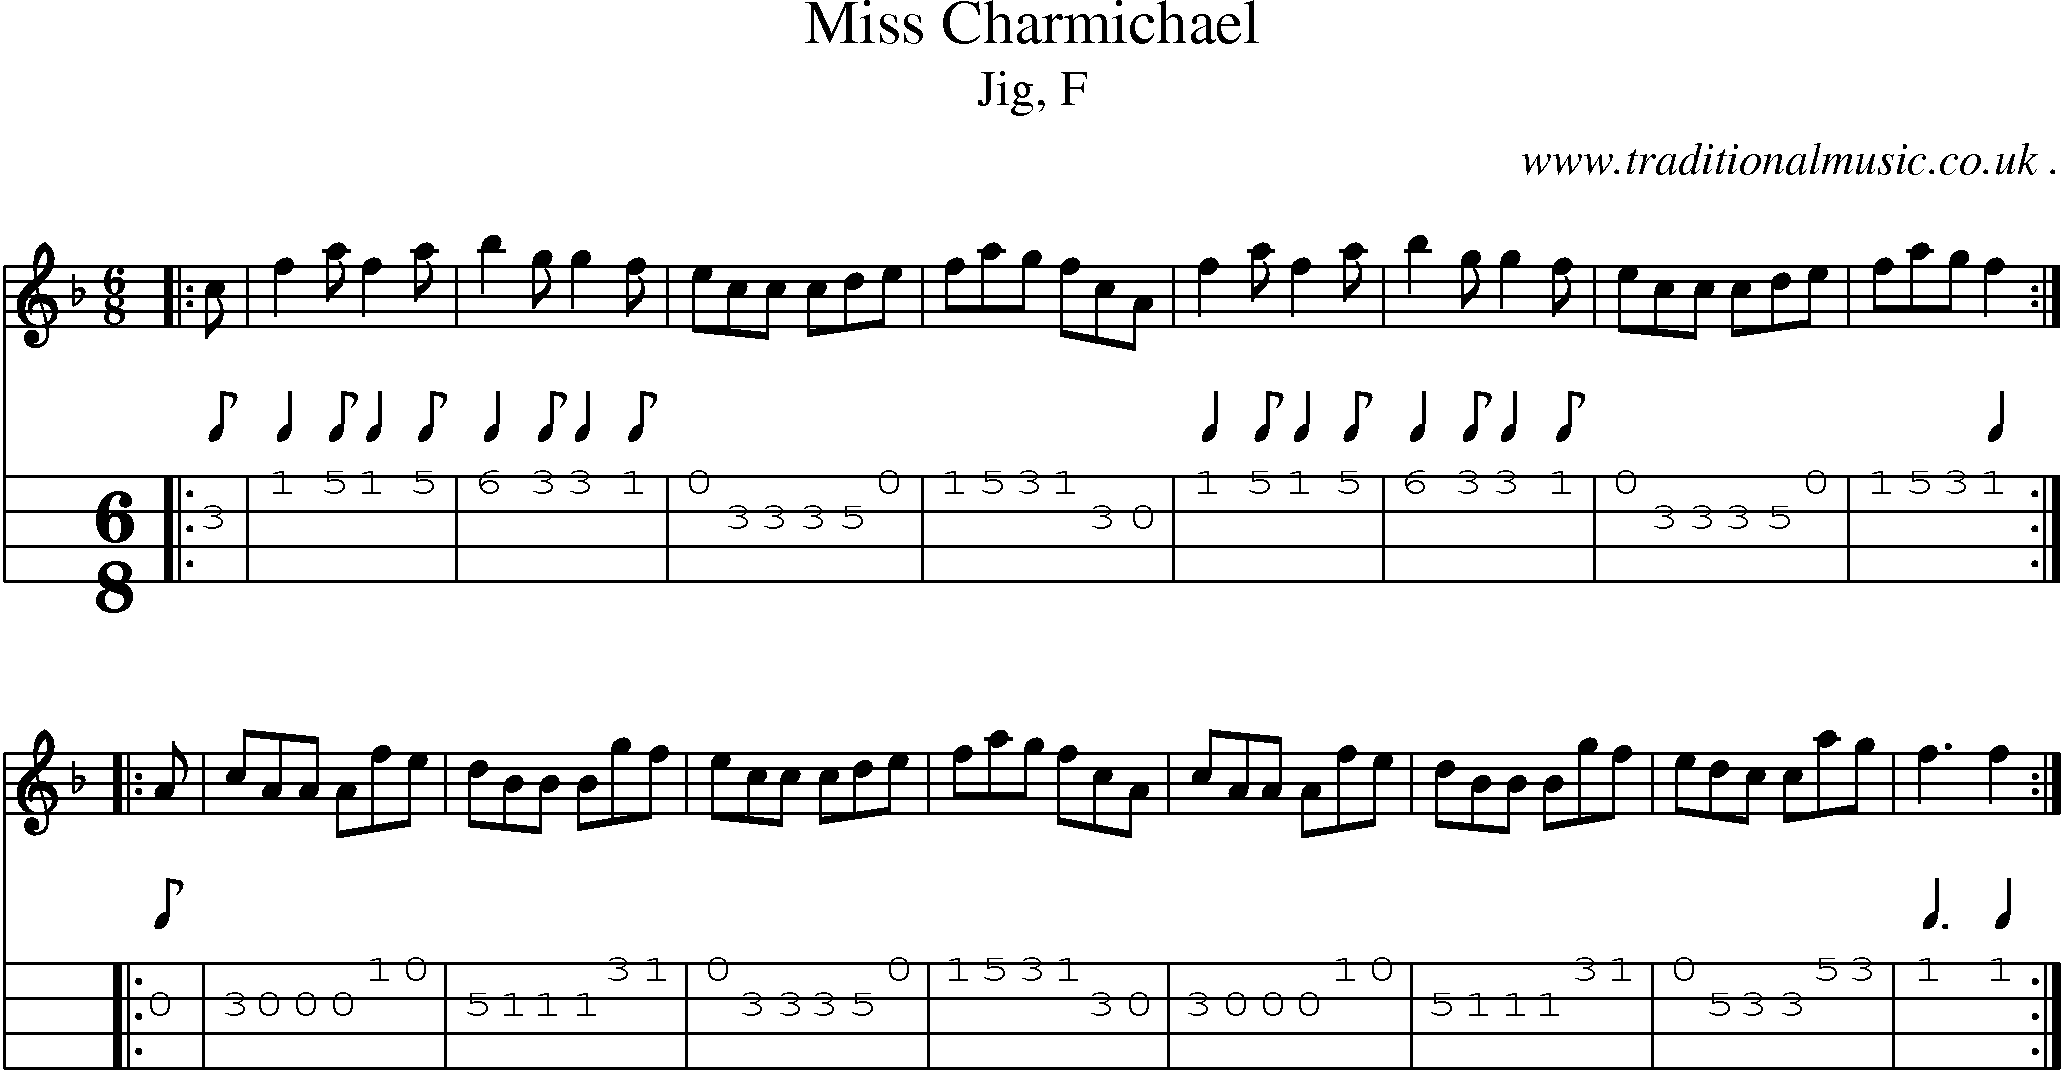 Sheet-music  score, Chords and Mandolin Tabs for Miss Charmichael